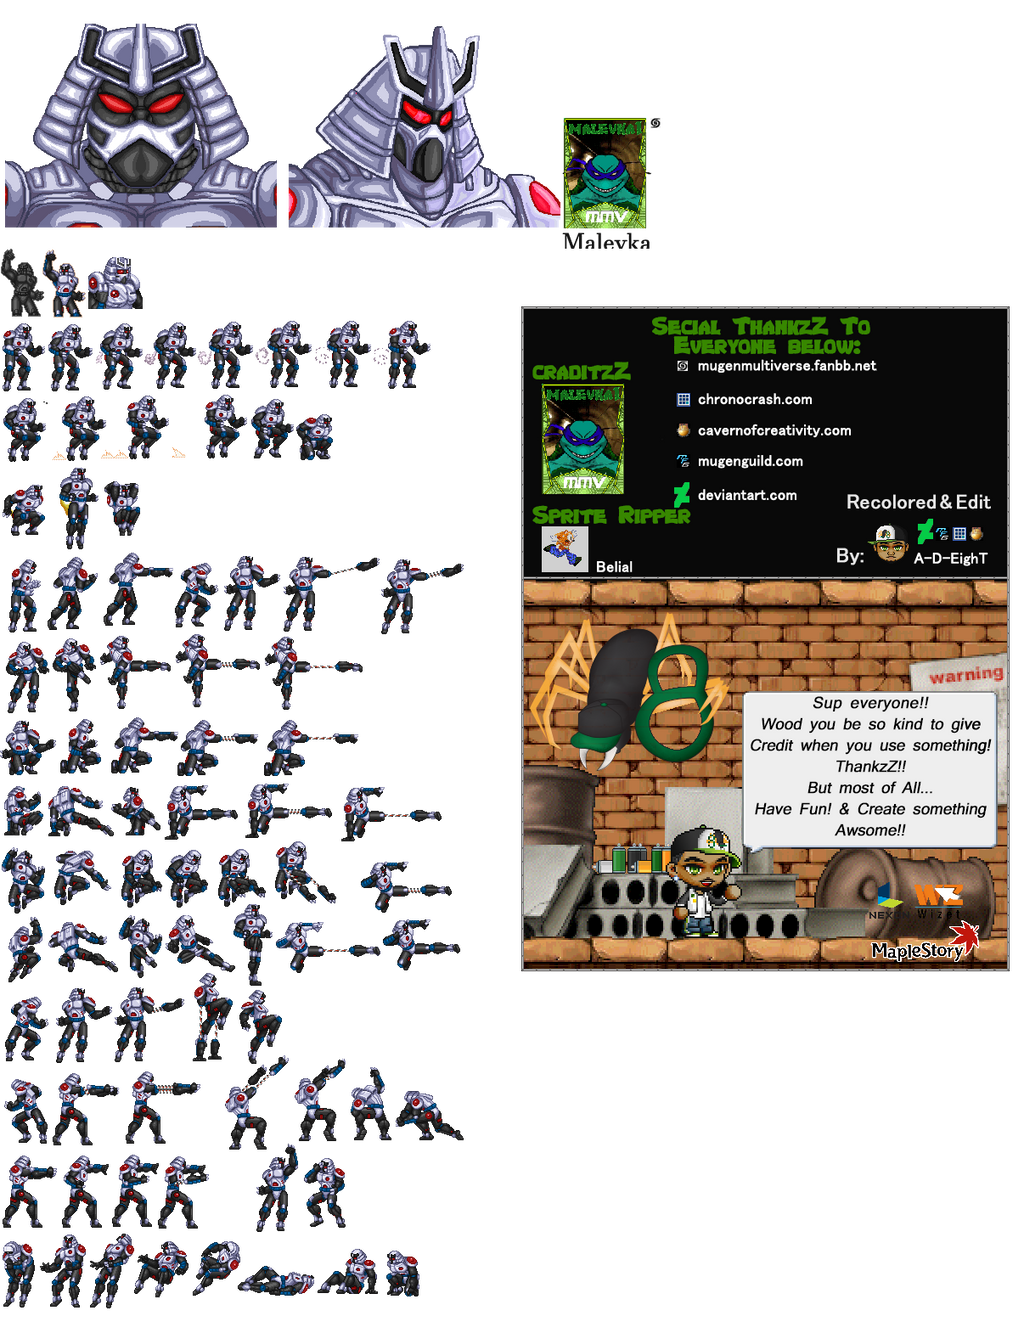 TMNT Tournament Fighter Based Sprites!! Chrome_dome_tmnt_tv_show_style_by_a_d_eight-dav376t